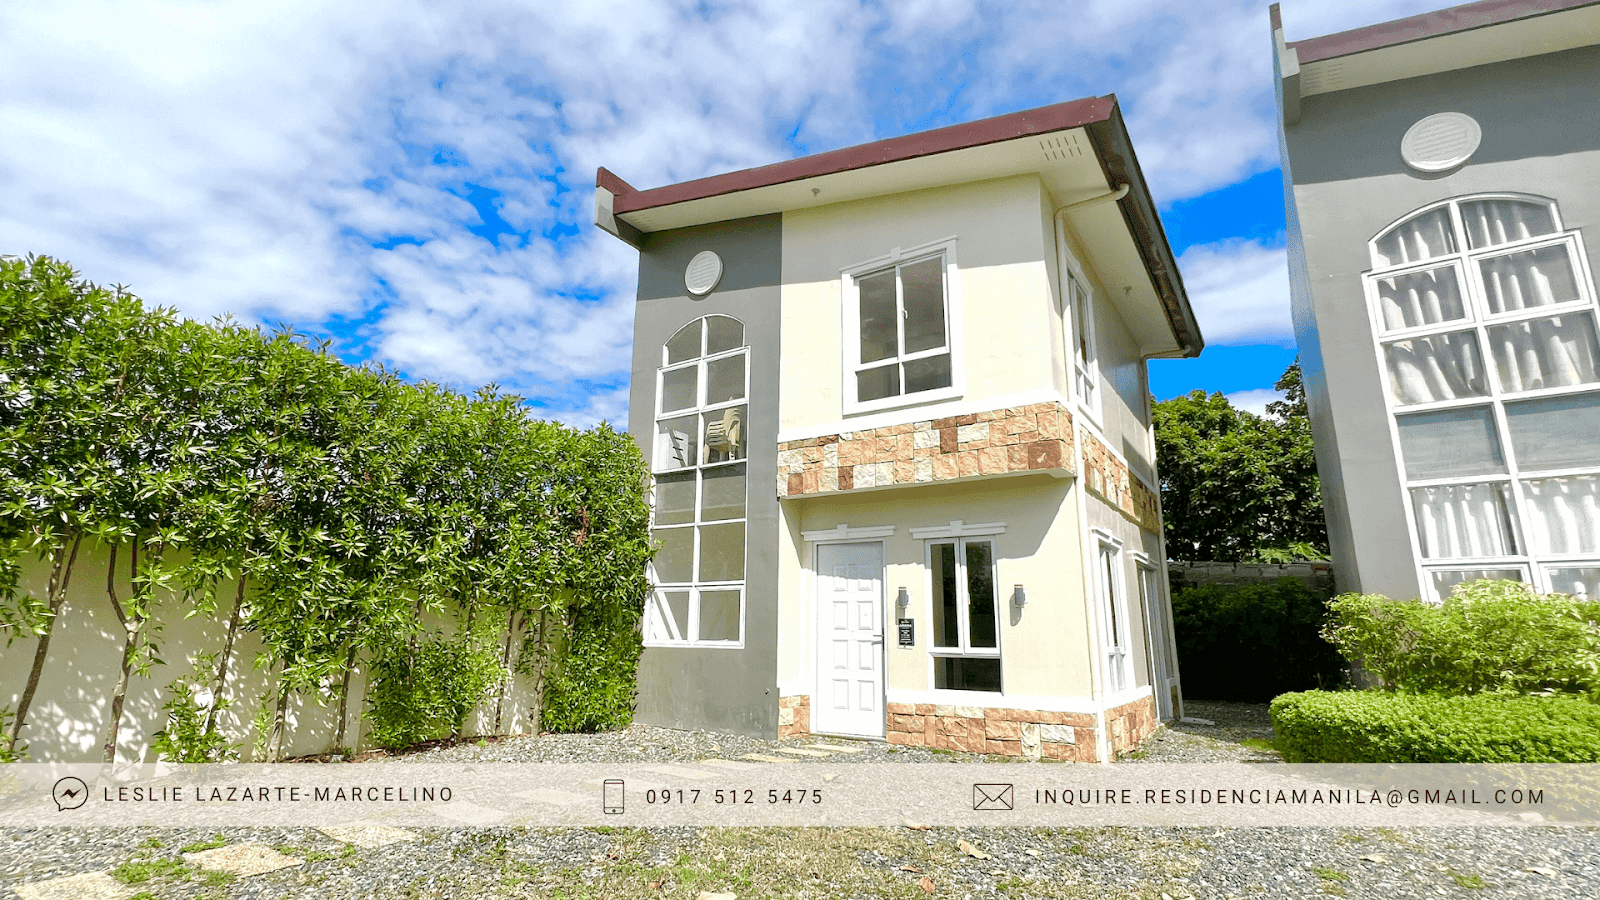 Photo of Montefaro Village - Ariana Model | Complete House for Sale with Fence and Gate Imus Cavite | Breighton Land Inc. (subsidiary of Profriends Inc.)